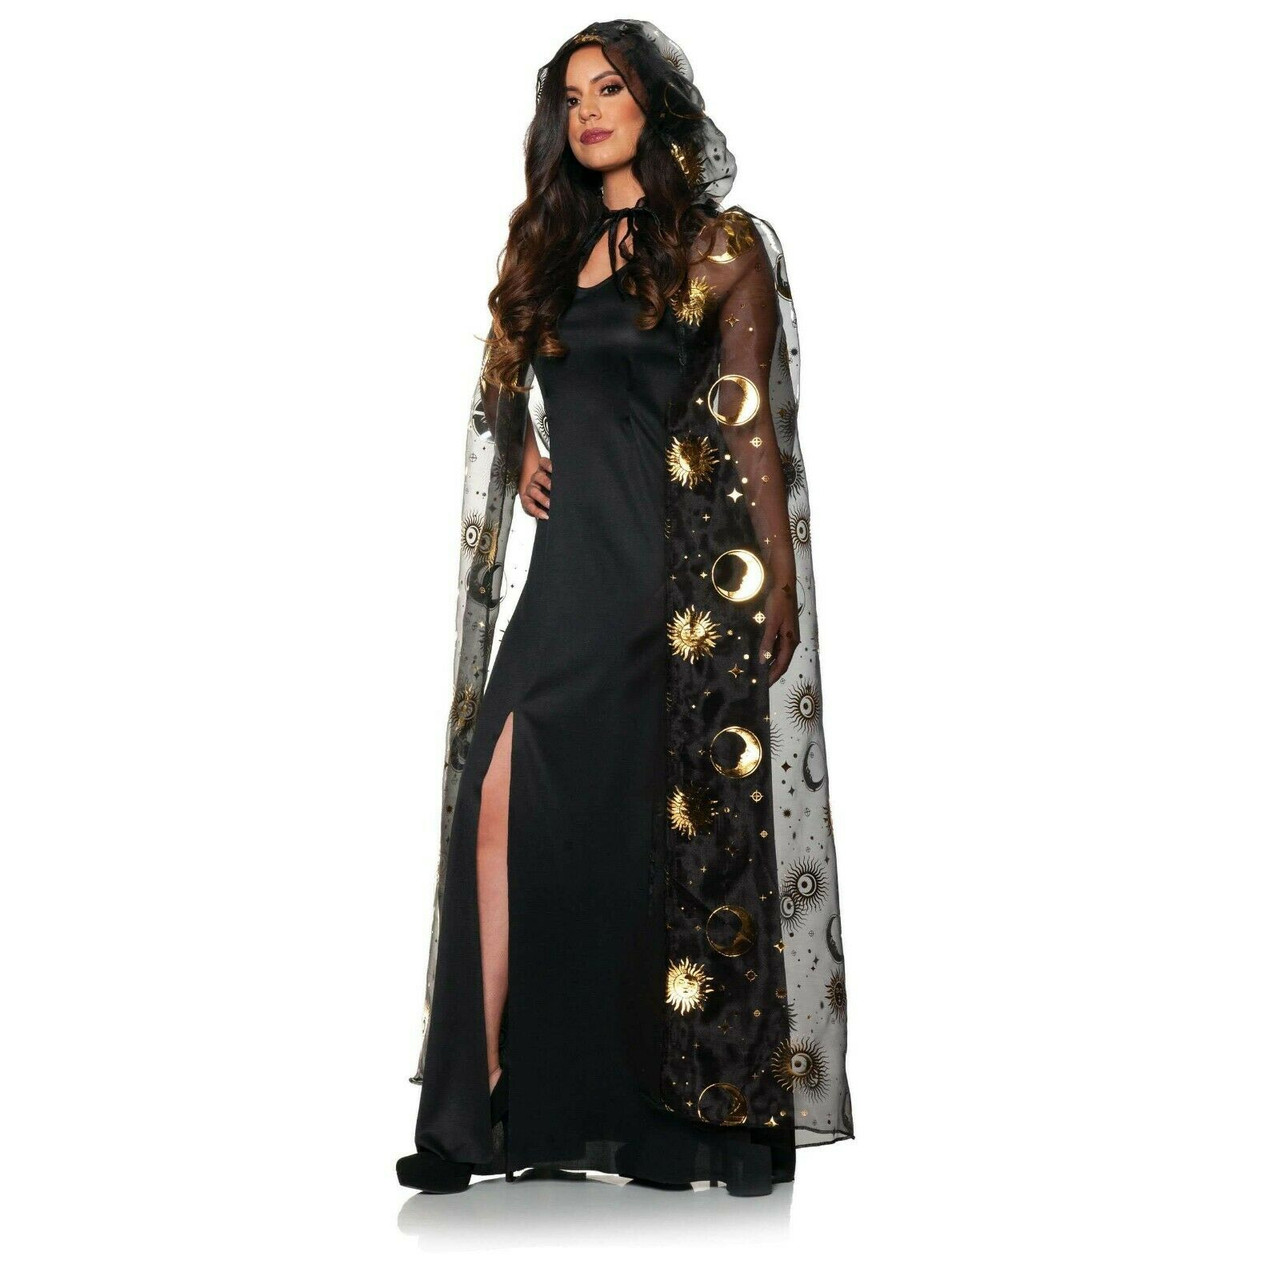 Women's Sexy Witch Costume | The Halloween Spot